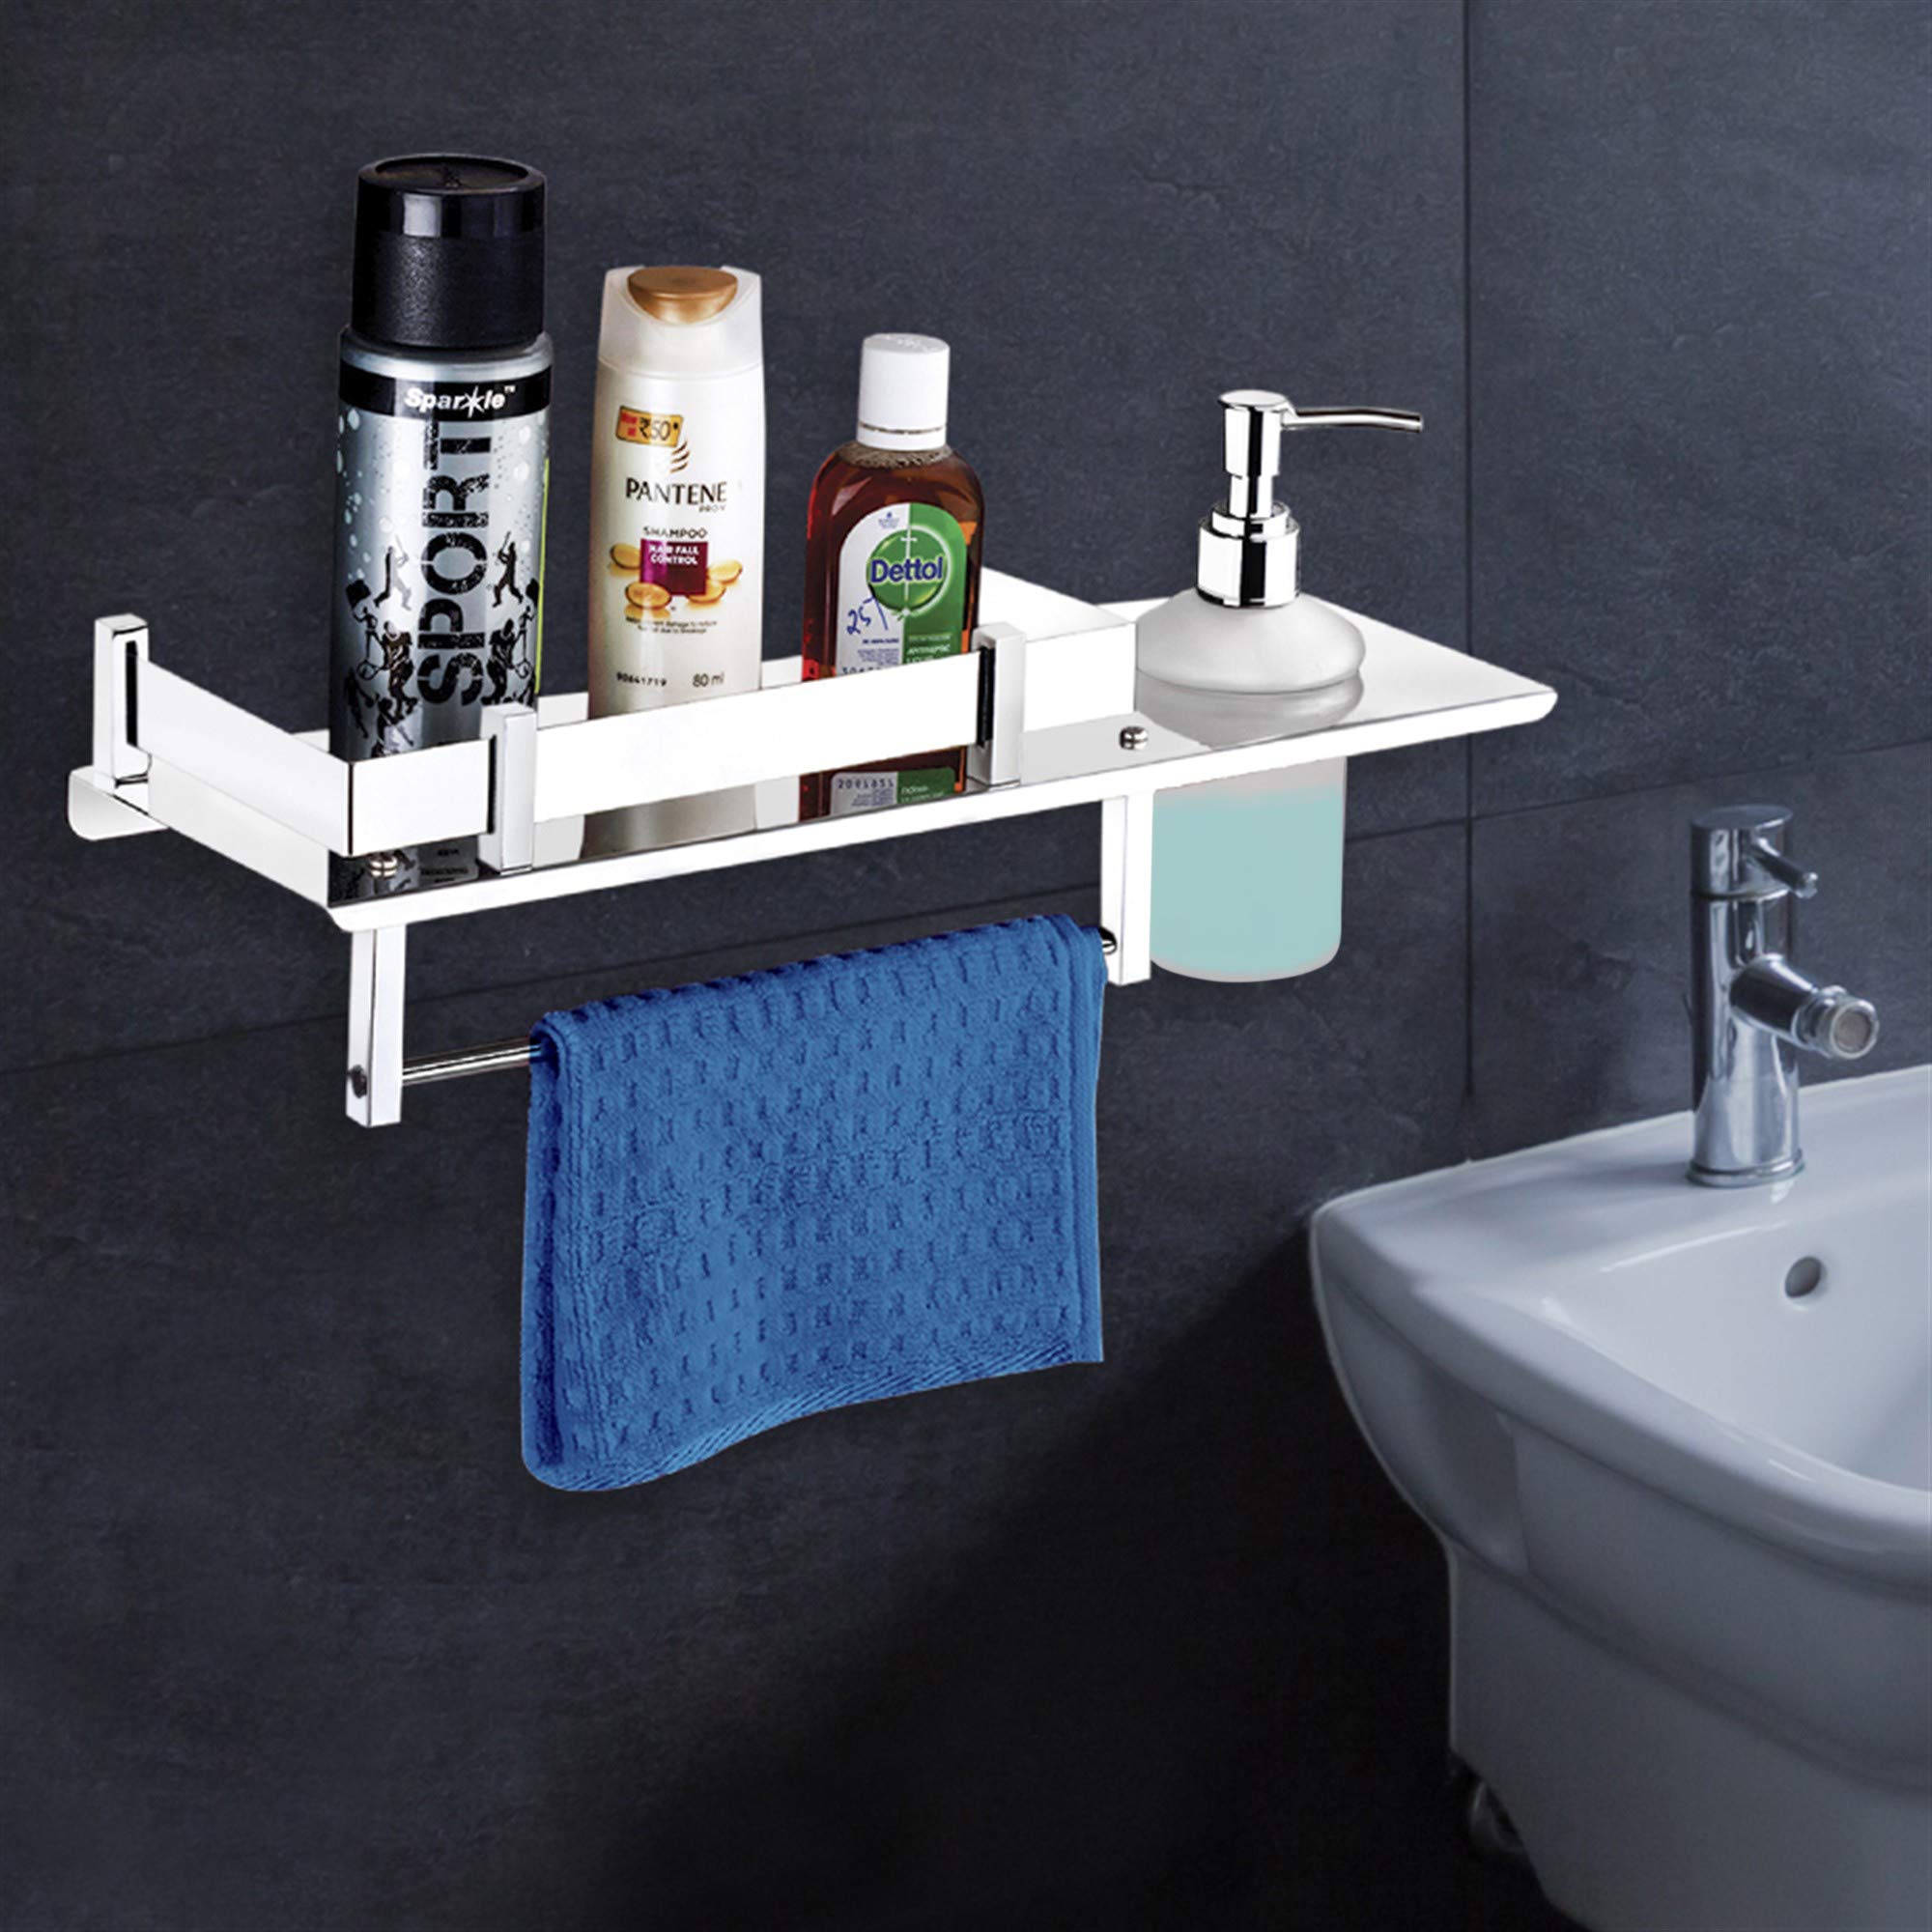 Plantex Stainless Steel 3in1 Multipurpose Bathroom Rack/Shelf with soap Dispenser and Towel Holder - Bathroom Accessories (15x6 Inches) , Silver , Set of 1